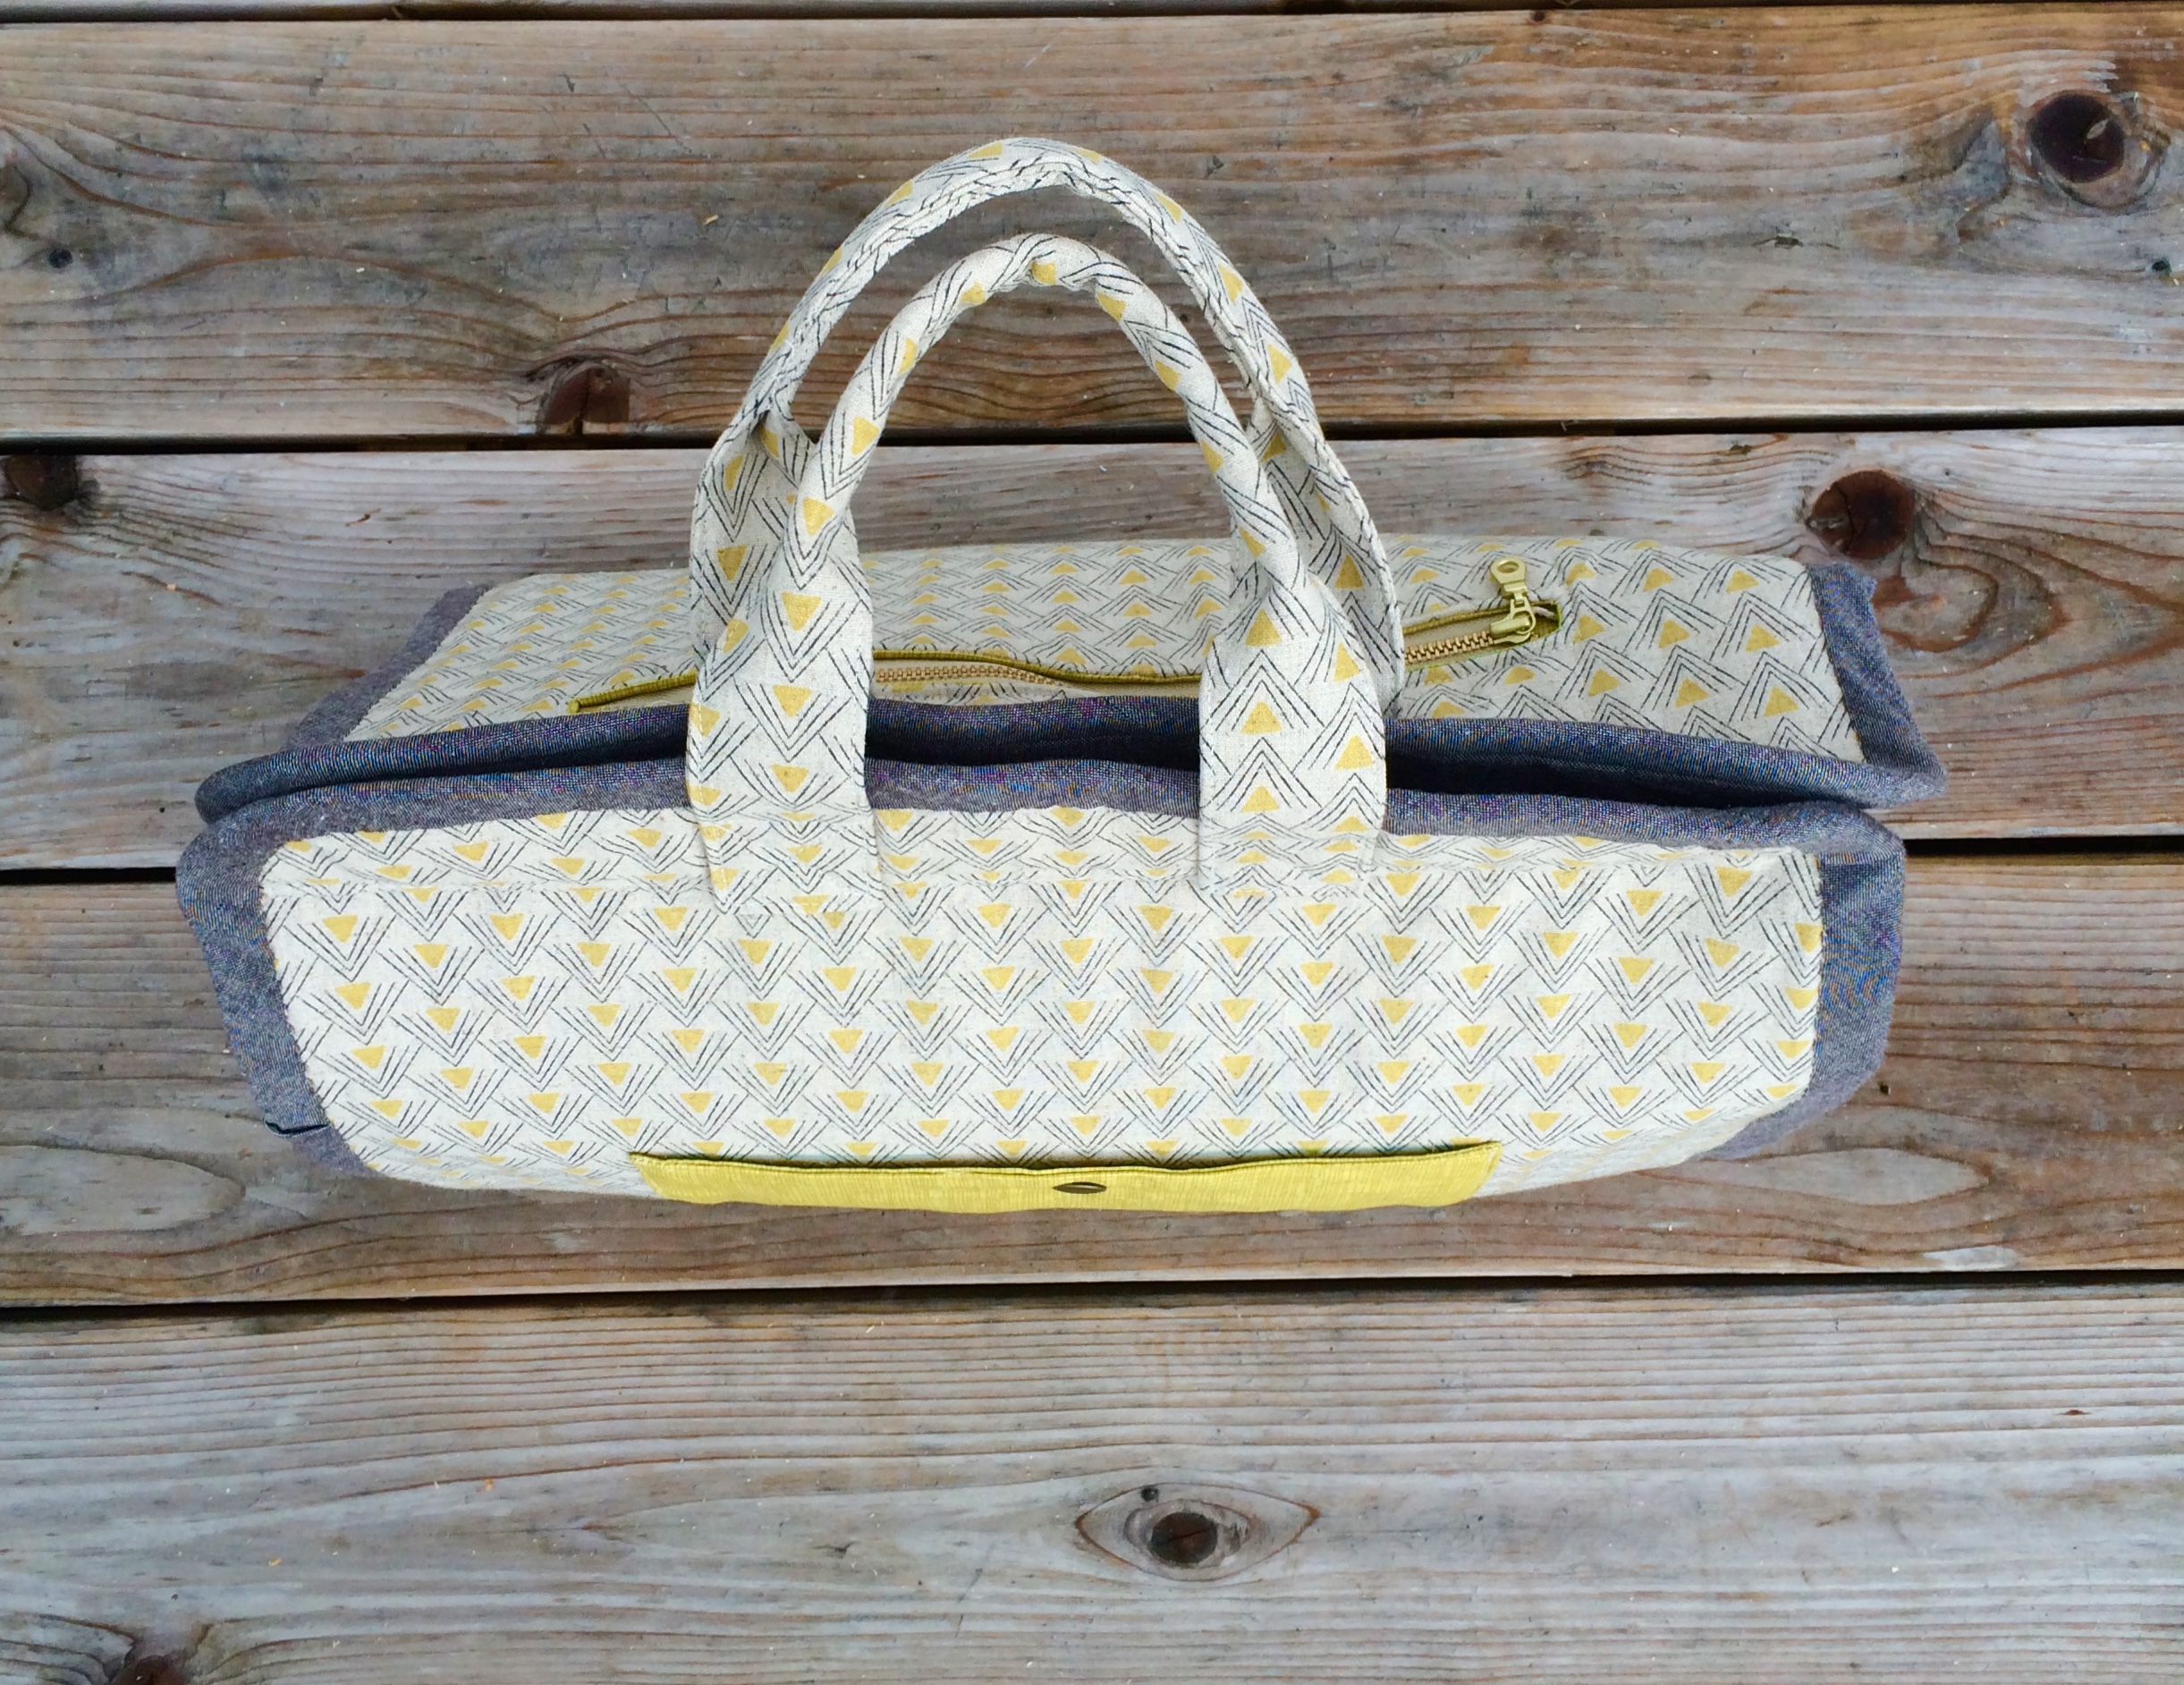 Maker's Tote by Brienne